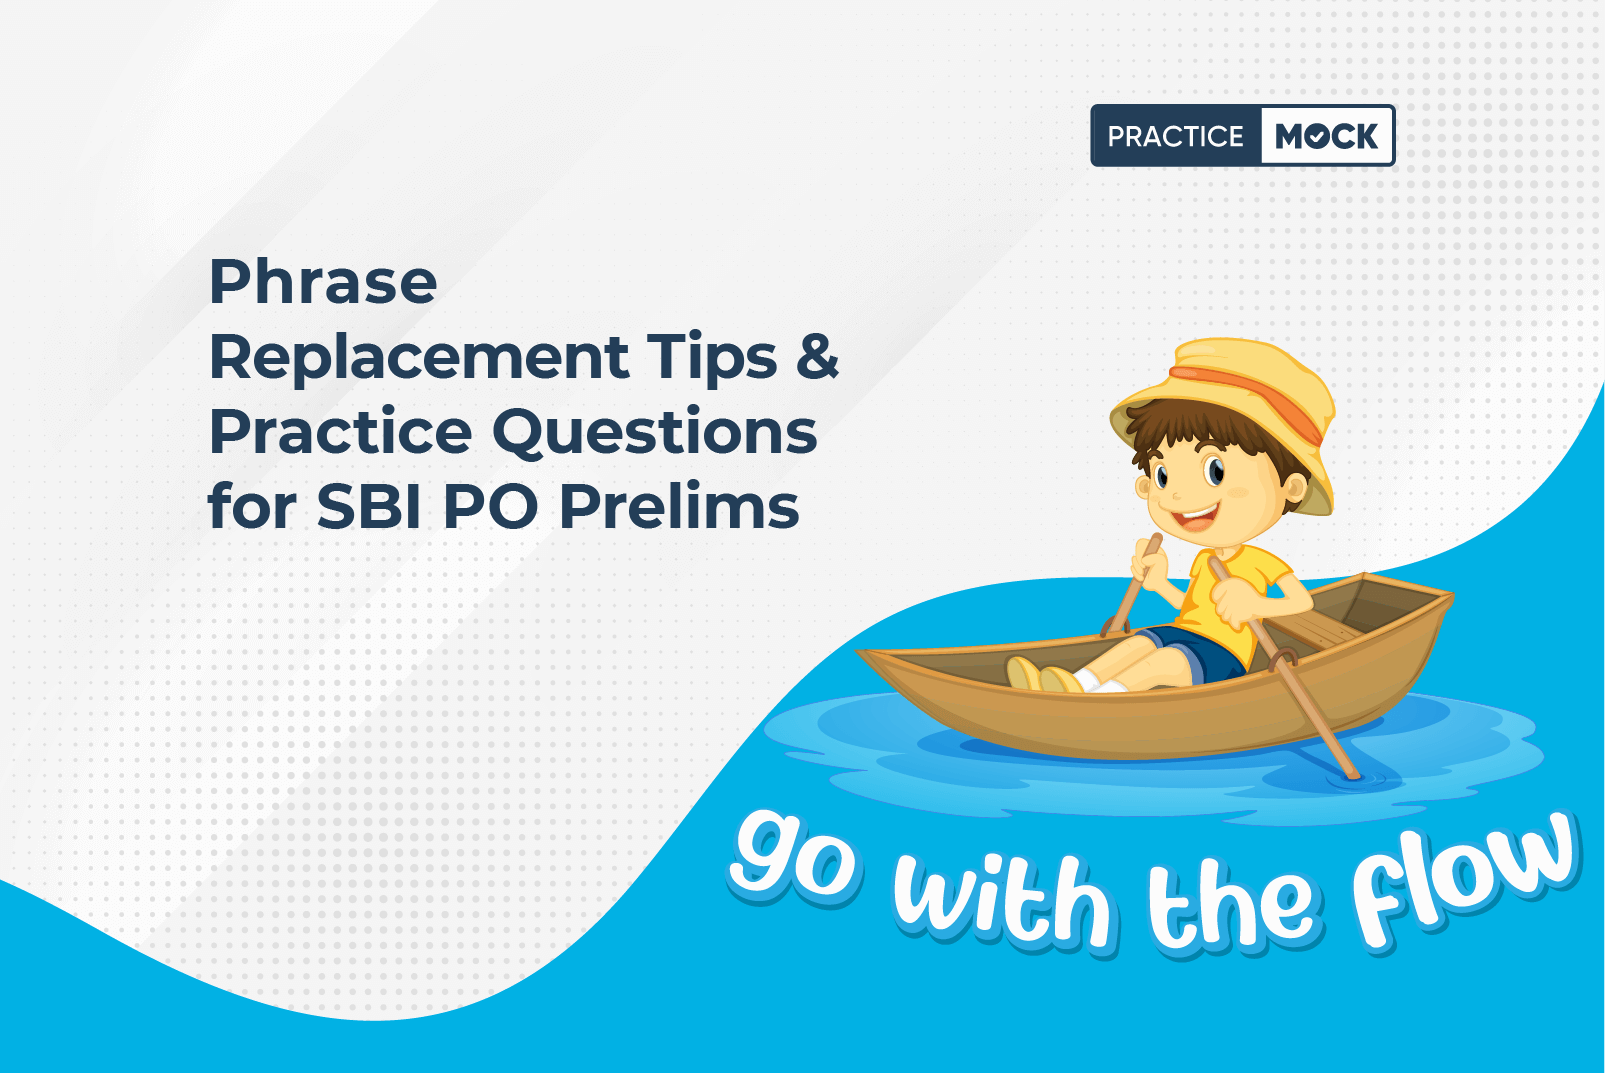 SBI PO Phrase Replacement Questions